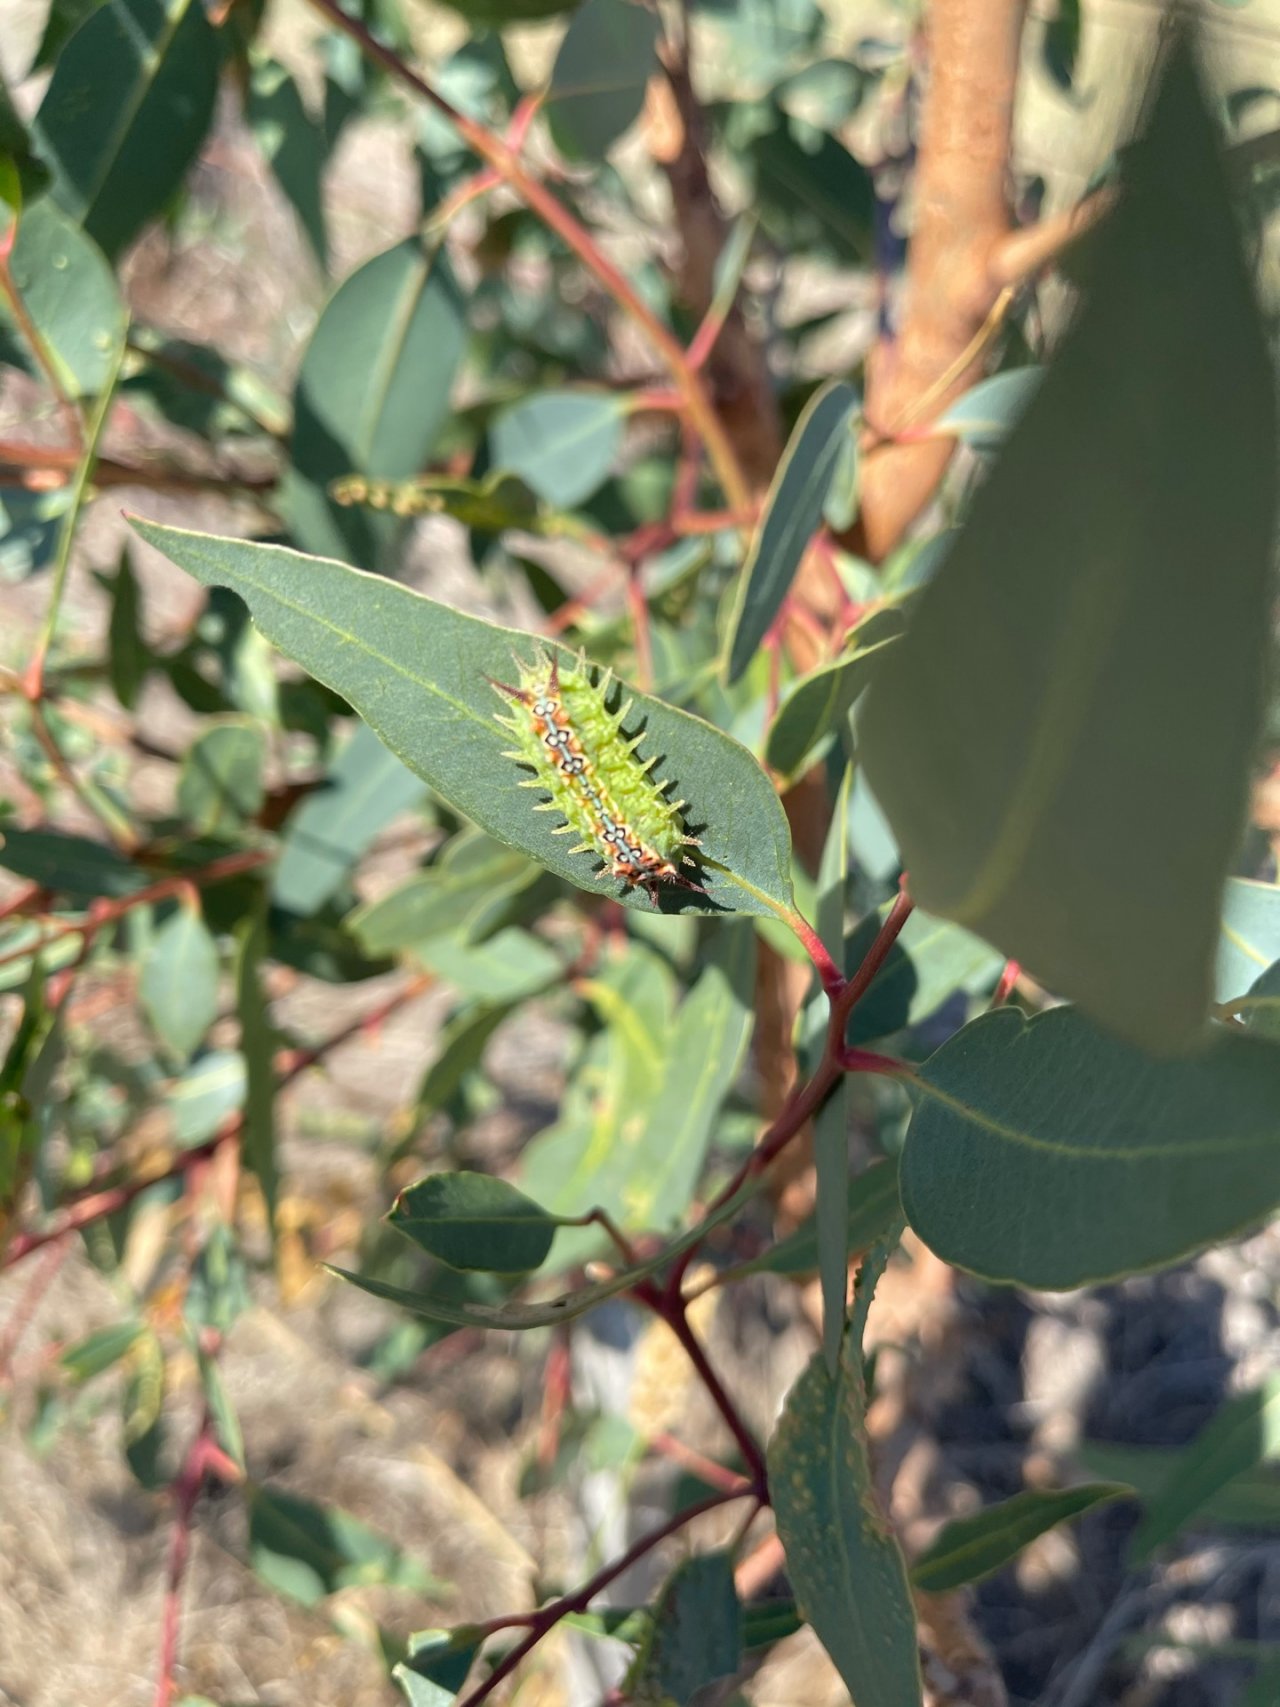 Other insect in ClimateWatch App spotted by Silvia Zola on 21.02.2021